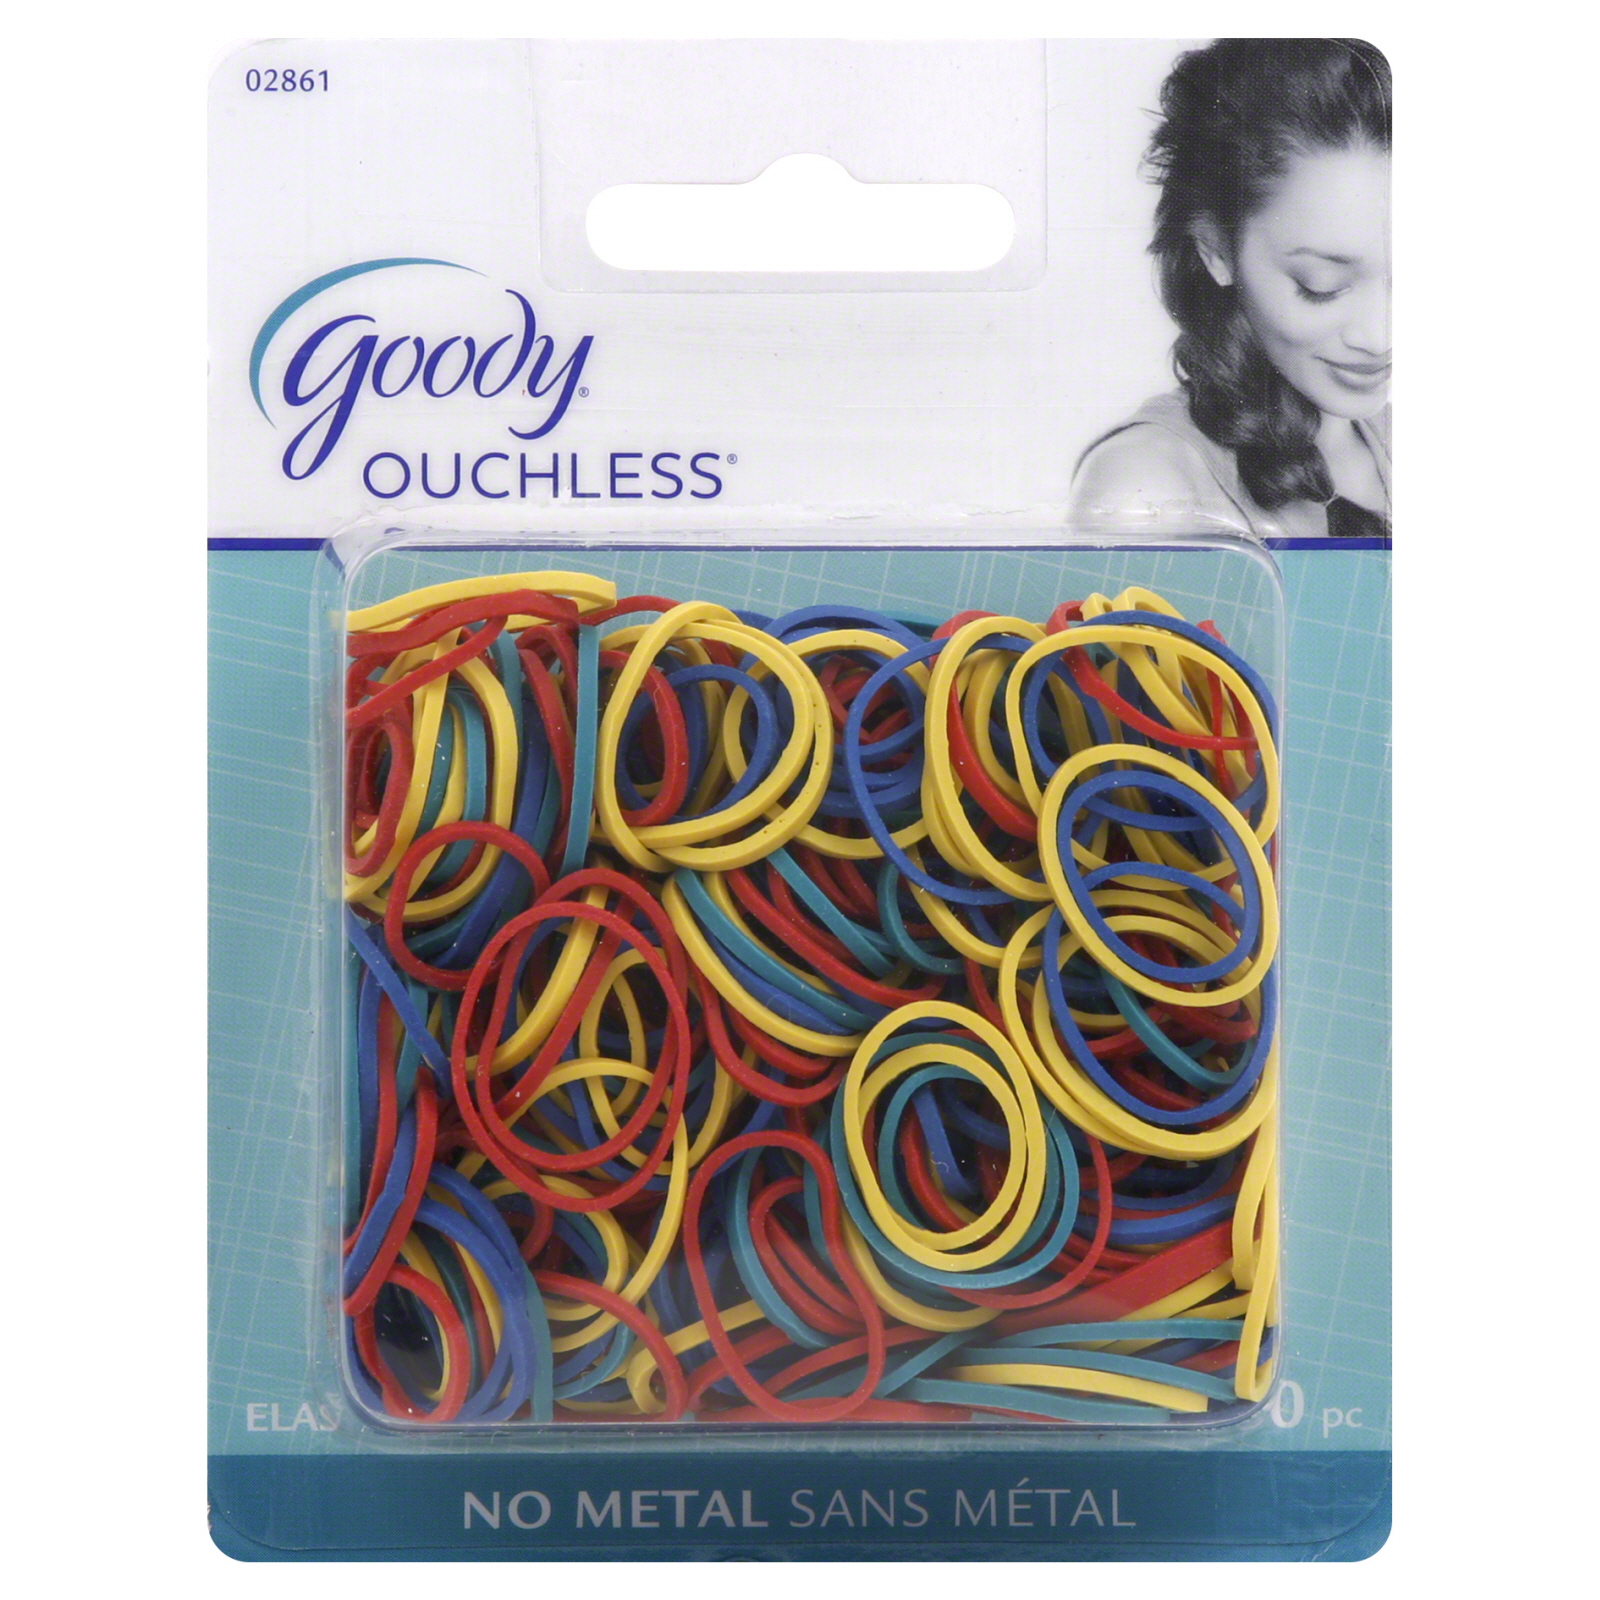 UPC 041457028612 product image for Goody Classics Rubberband, Assorted Colors, 250 CT | upcitemdb.com